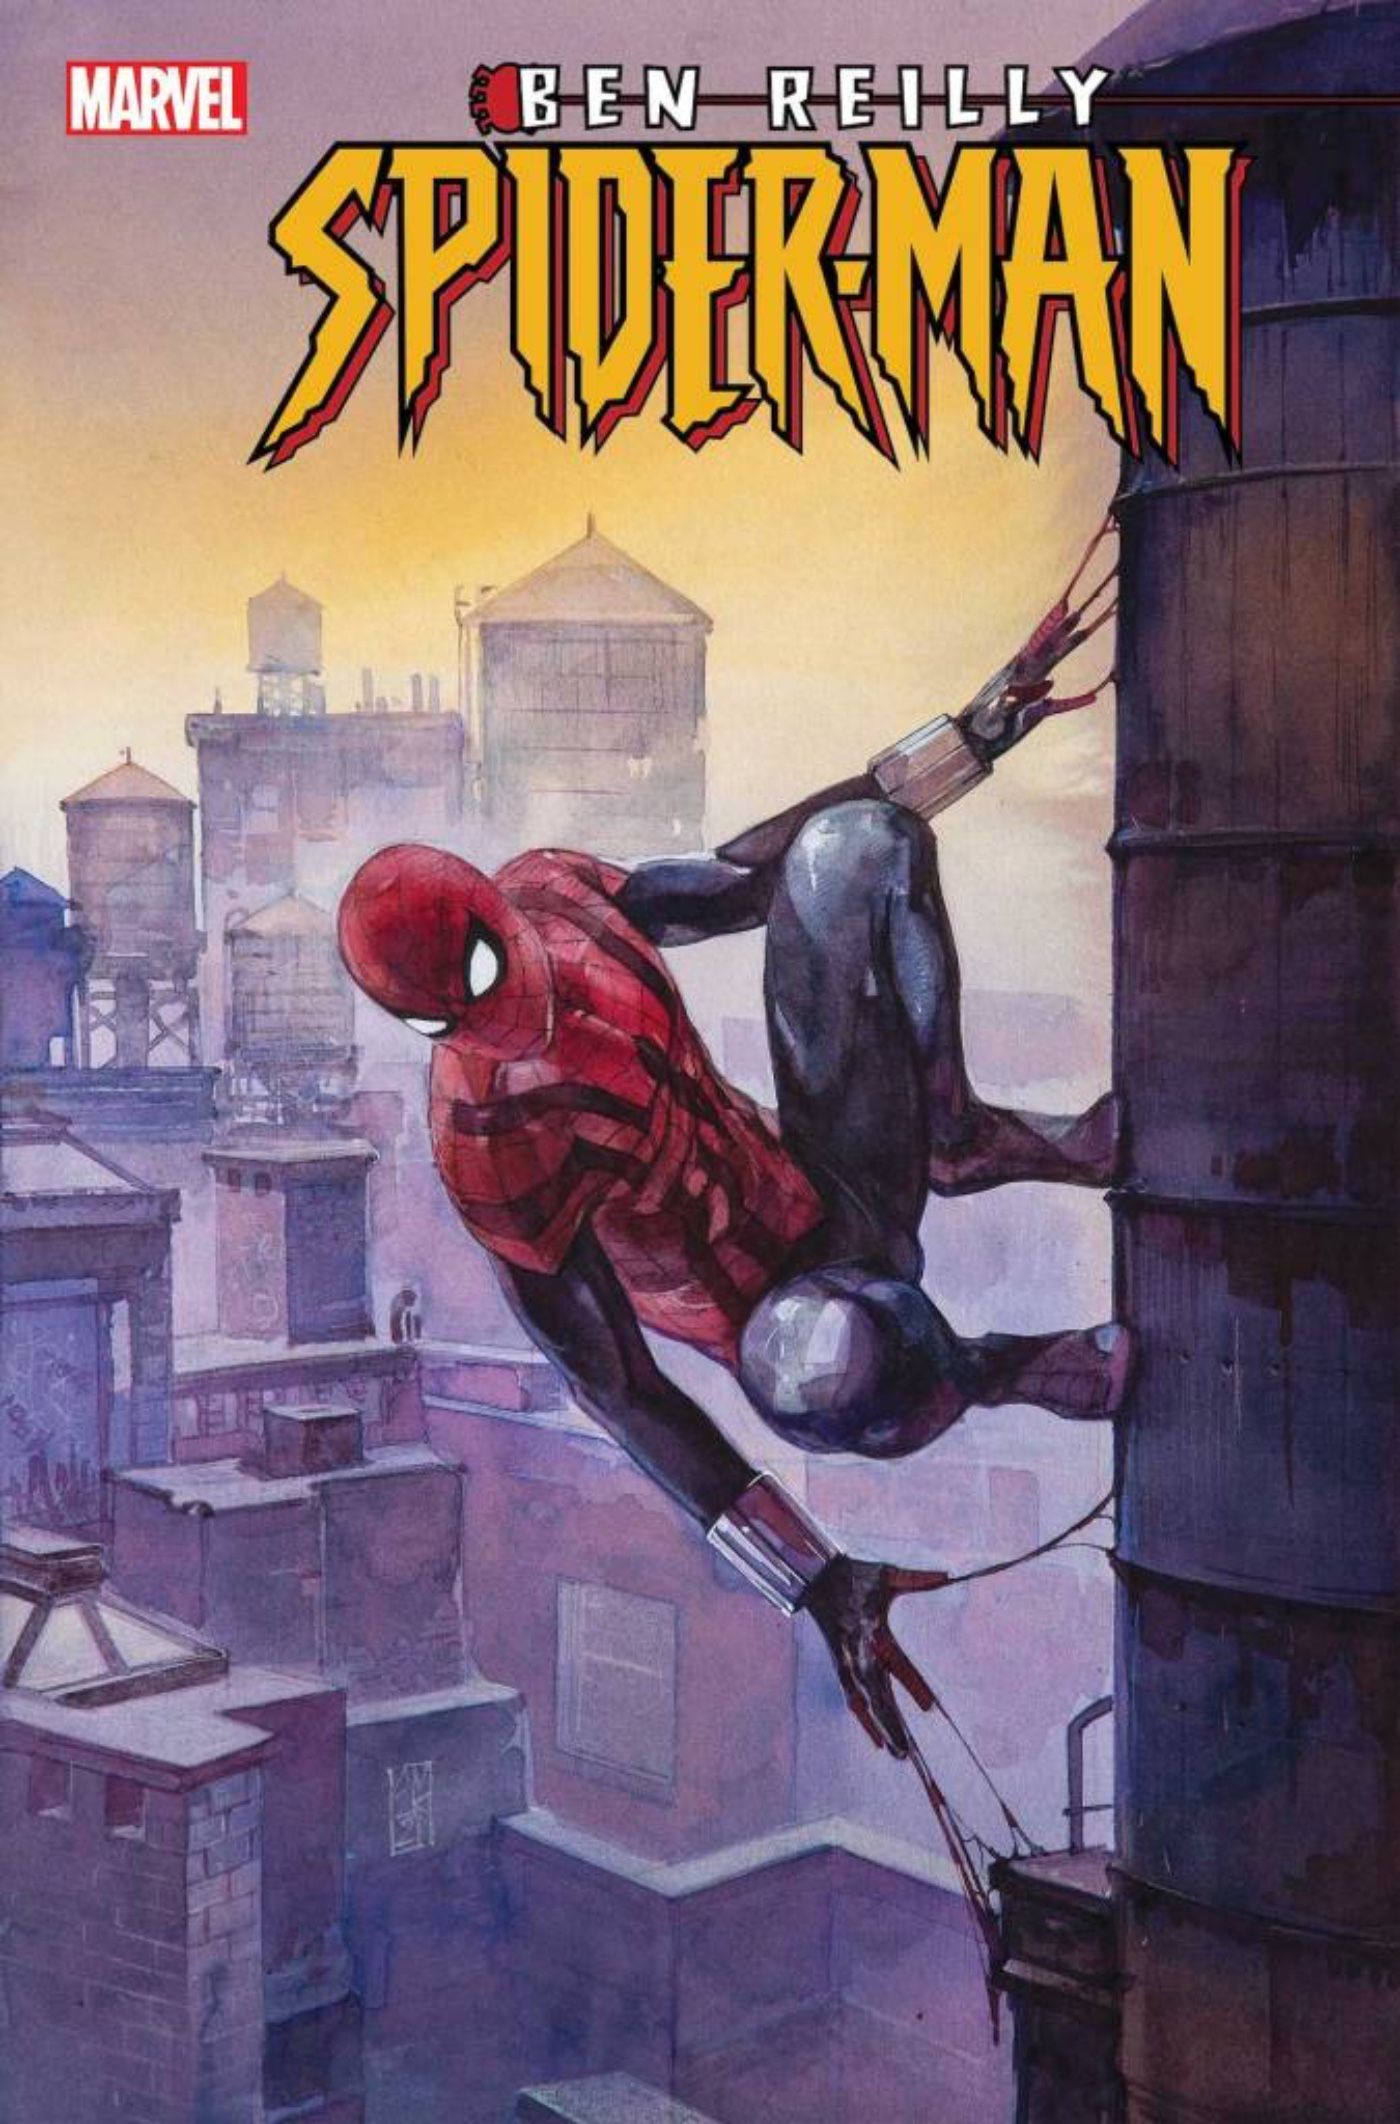 An Unused SpiderMan Design From 1995 Is Making Its Marvel Comics Debut